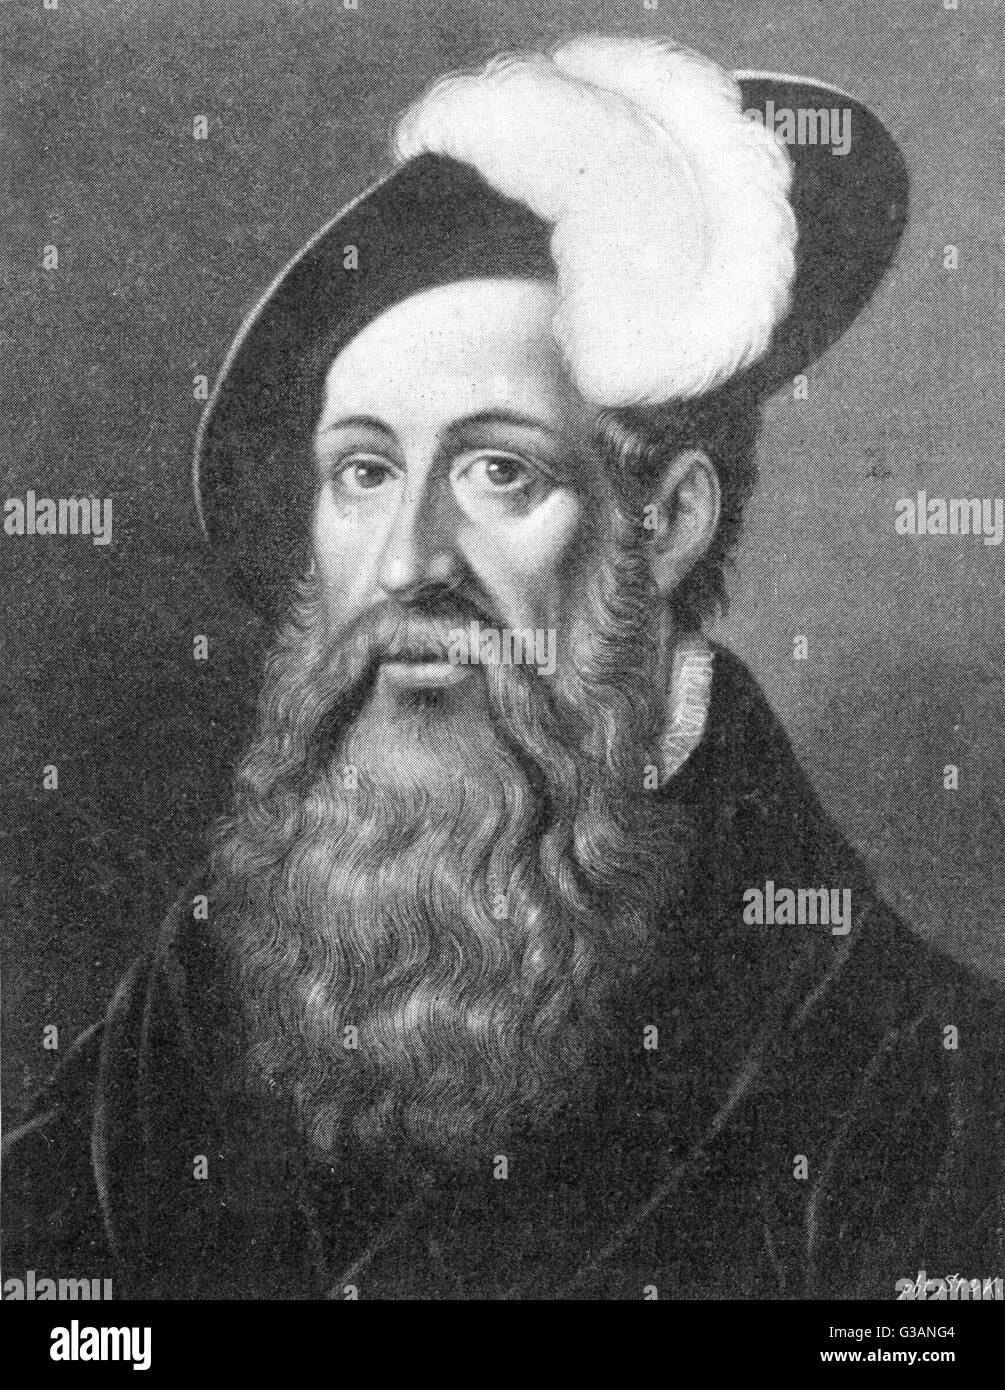 Johann Fust (1400-1466) - German printer. He appears to have been the partner of Johann Gutenberg in promoting the art of printing as he was his money-lender. In 1455, the partnership was dissolved as Fust brought suit against Gutenberg to recover the mon Stock Photo